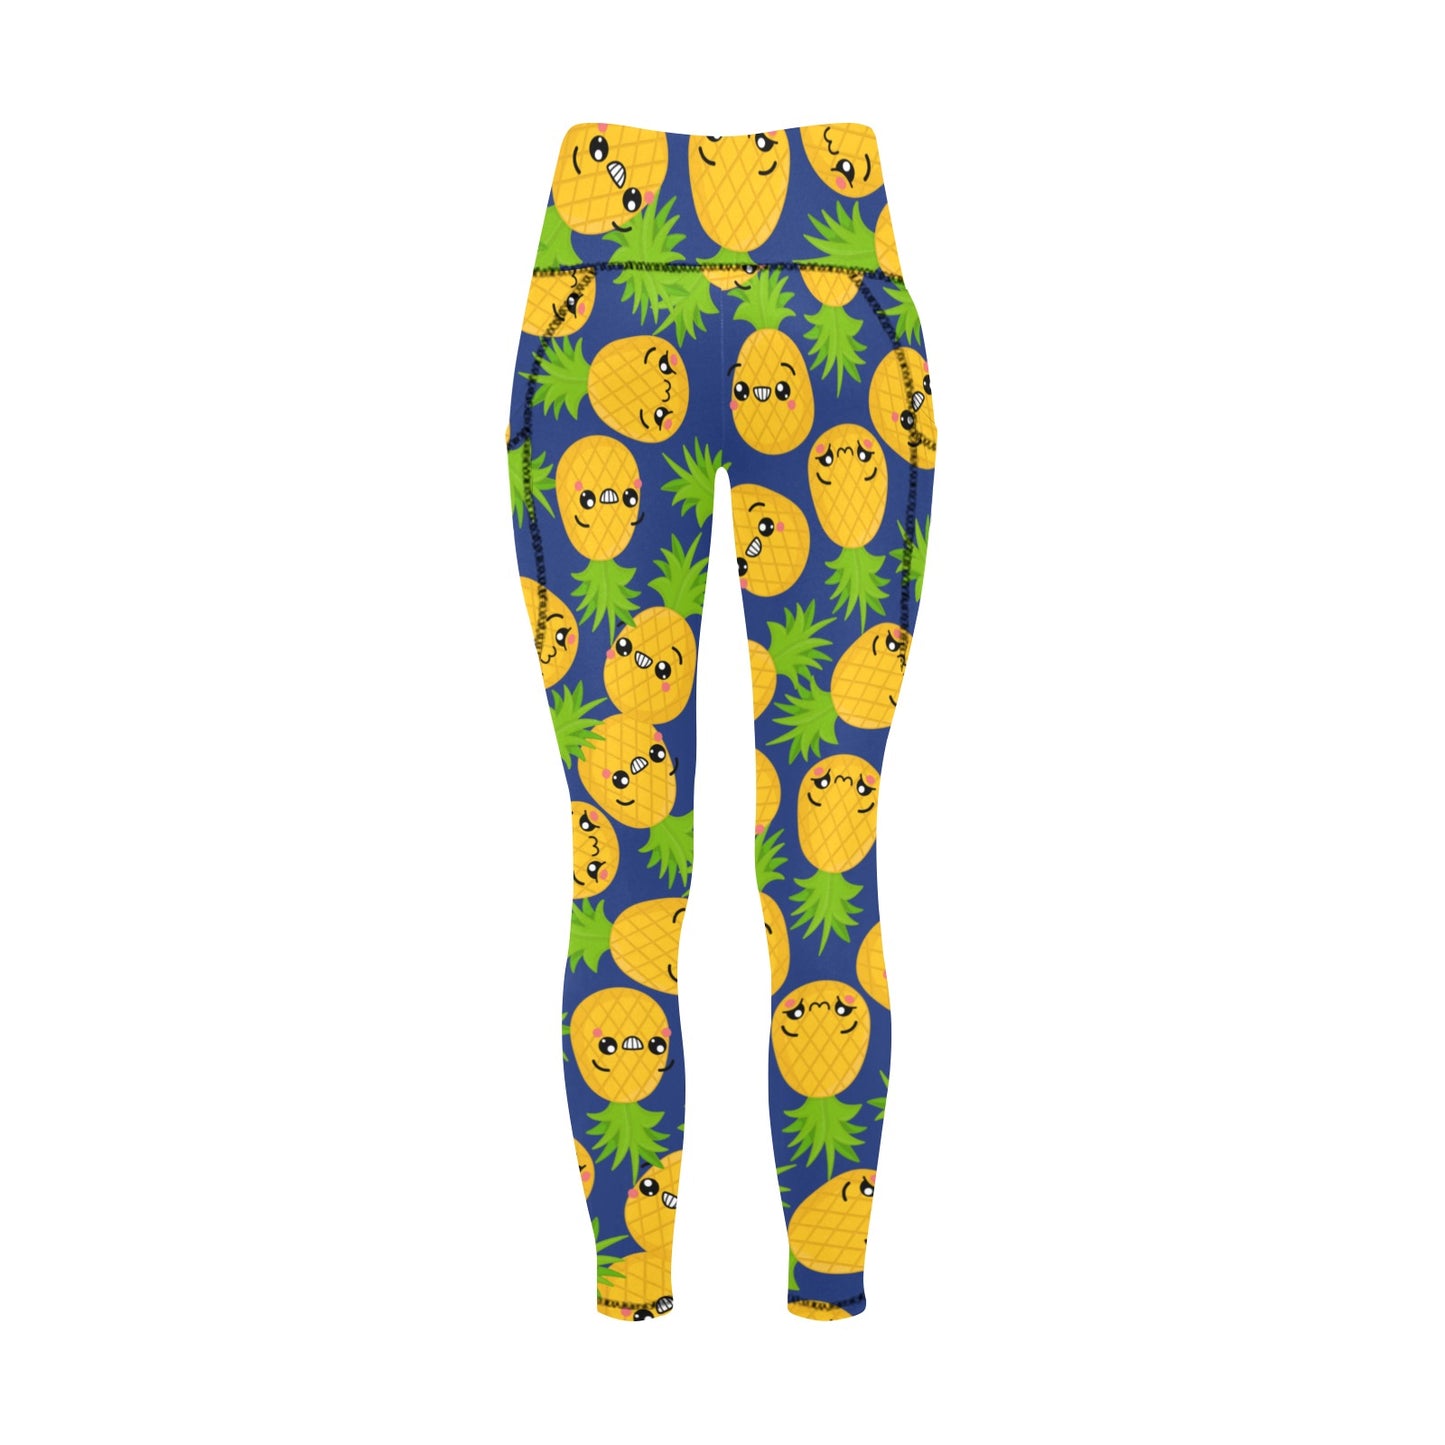 Cool Pineapples - Women's Leggings with Pockets Women's Leggings with Pockets S - 2XL Food